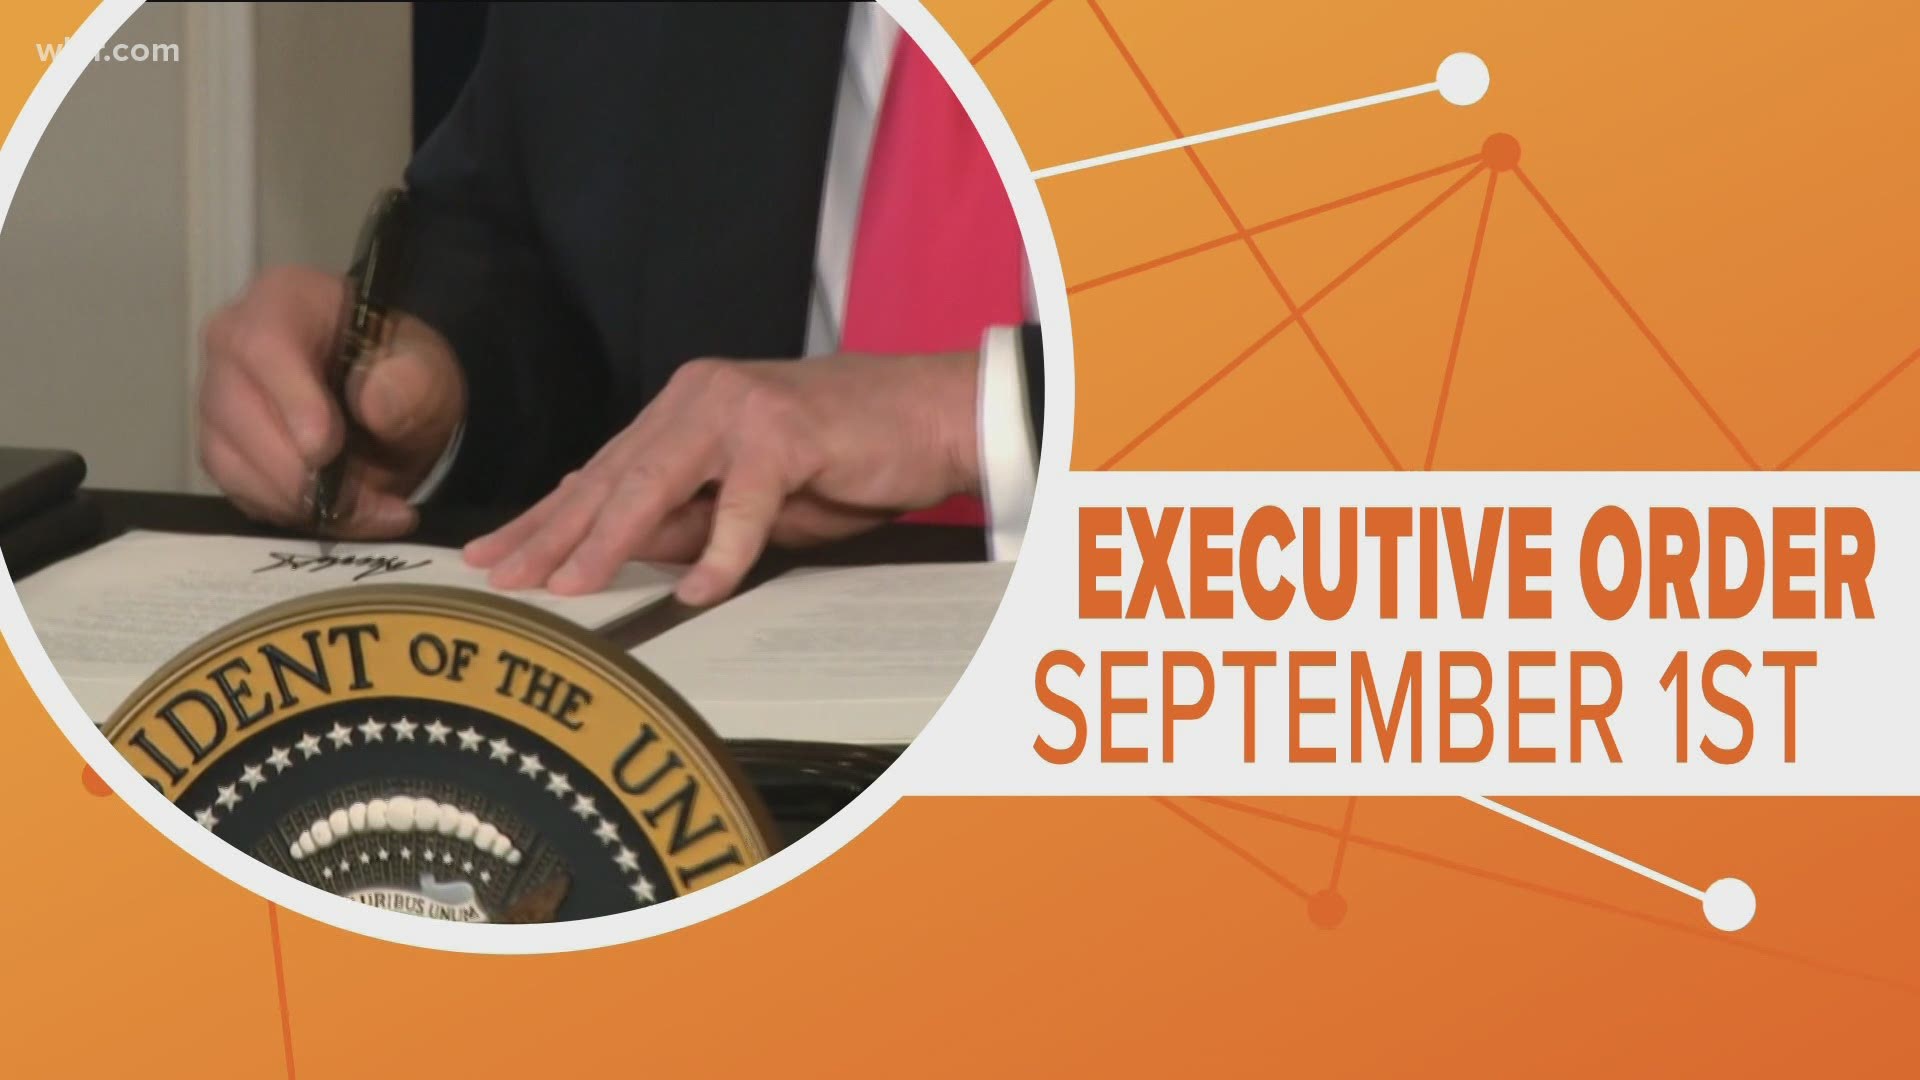 The payroll tax deferral was one of four executive orders signed by President Trump to help ease the burden on Americans. It went into effect on Sept. 1.